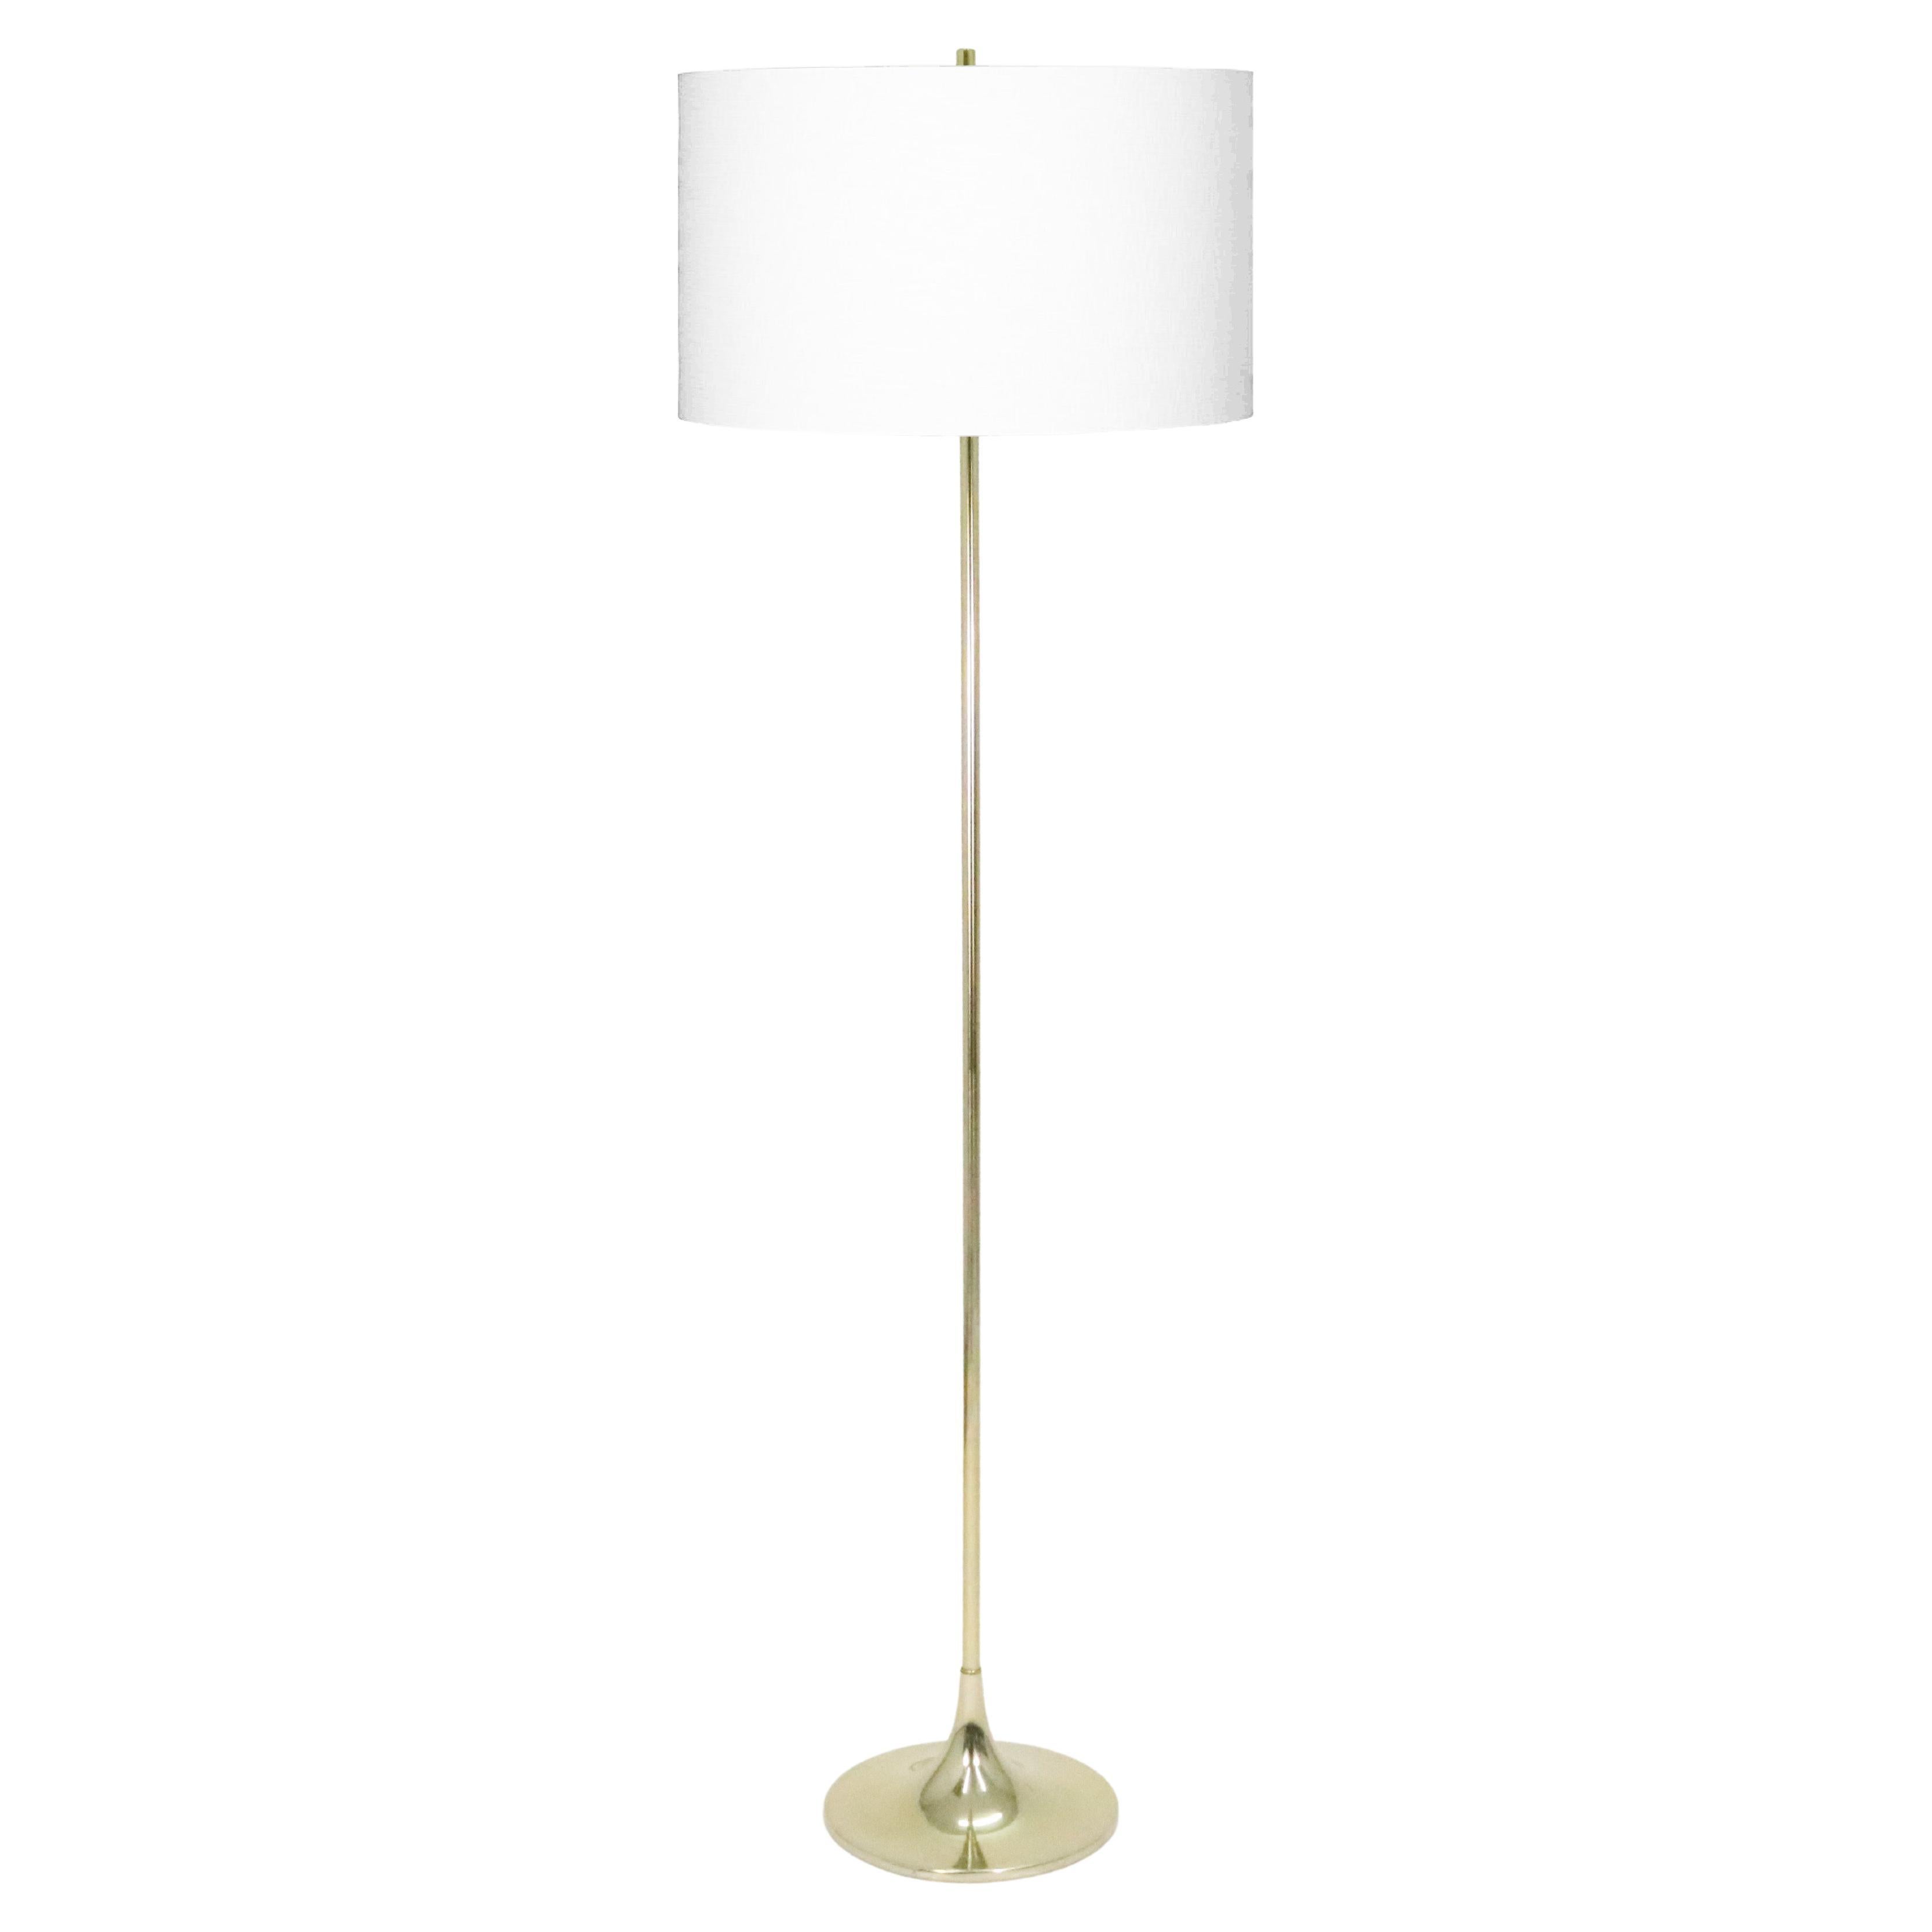 Bill Curry for Laurel Floor Lamp For Sale